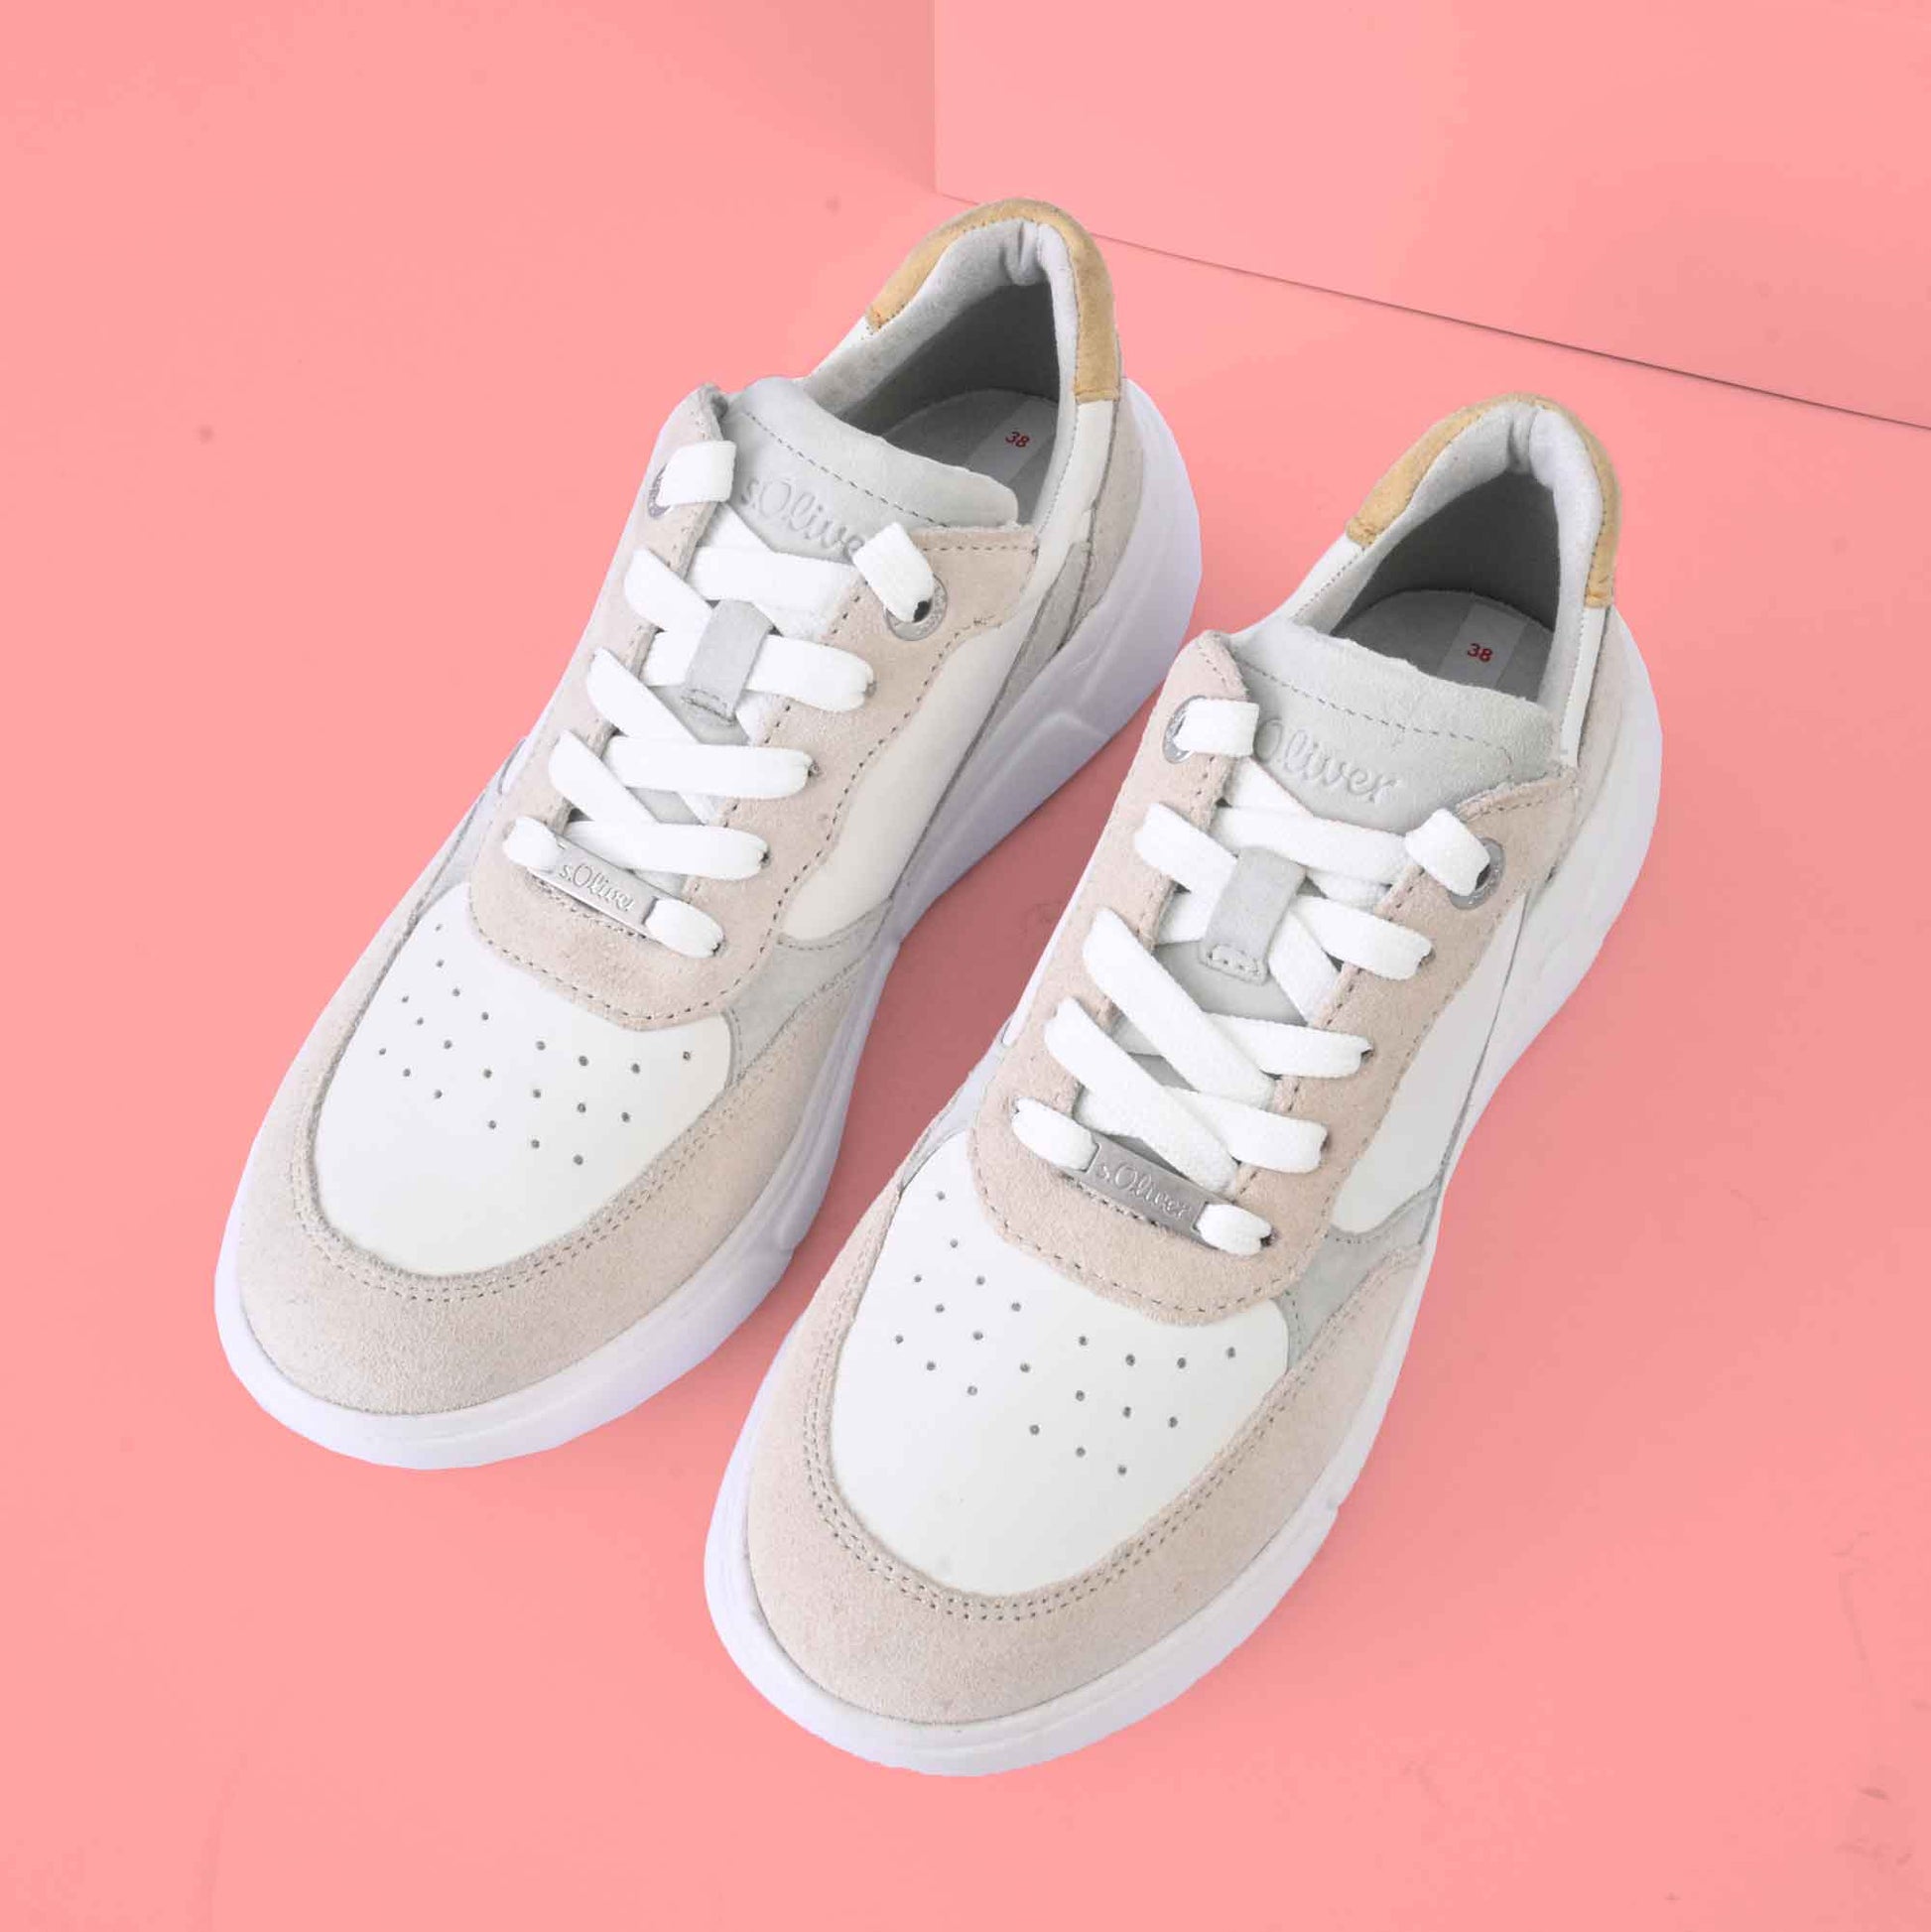 S.Oliver Unisex Leather Sneakers Unisex Shoes Shafi Pvt. Limited 